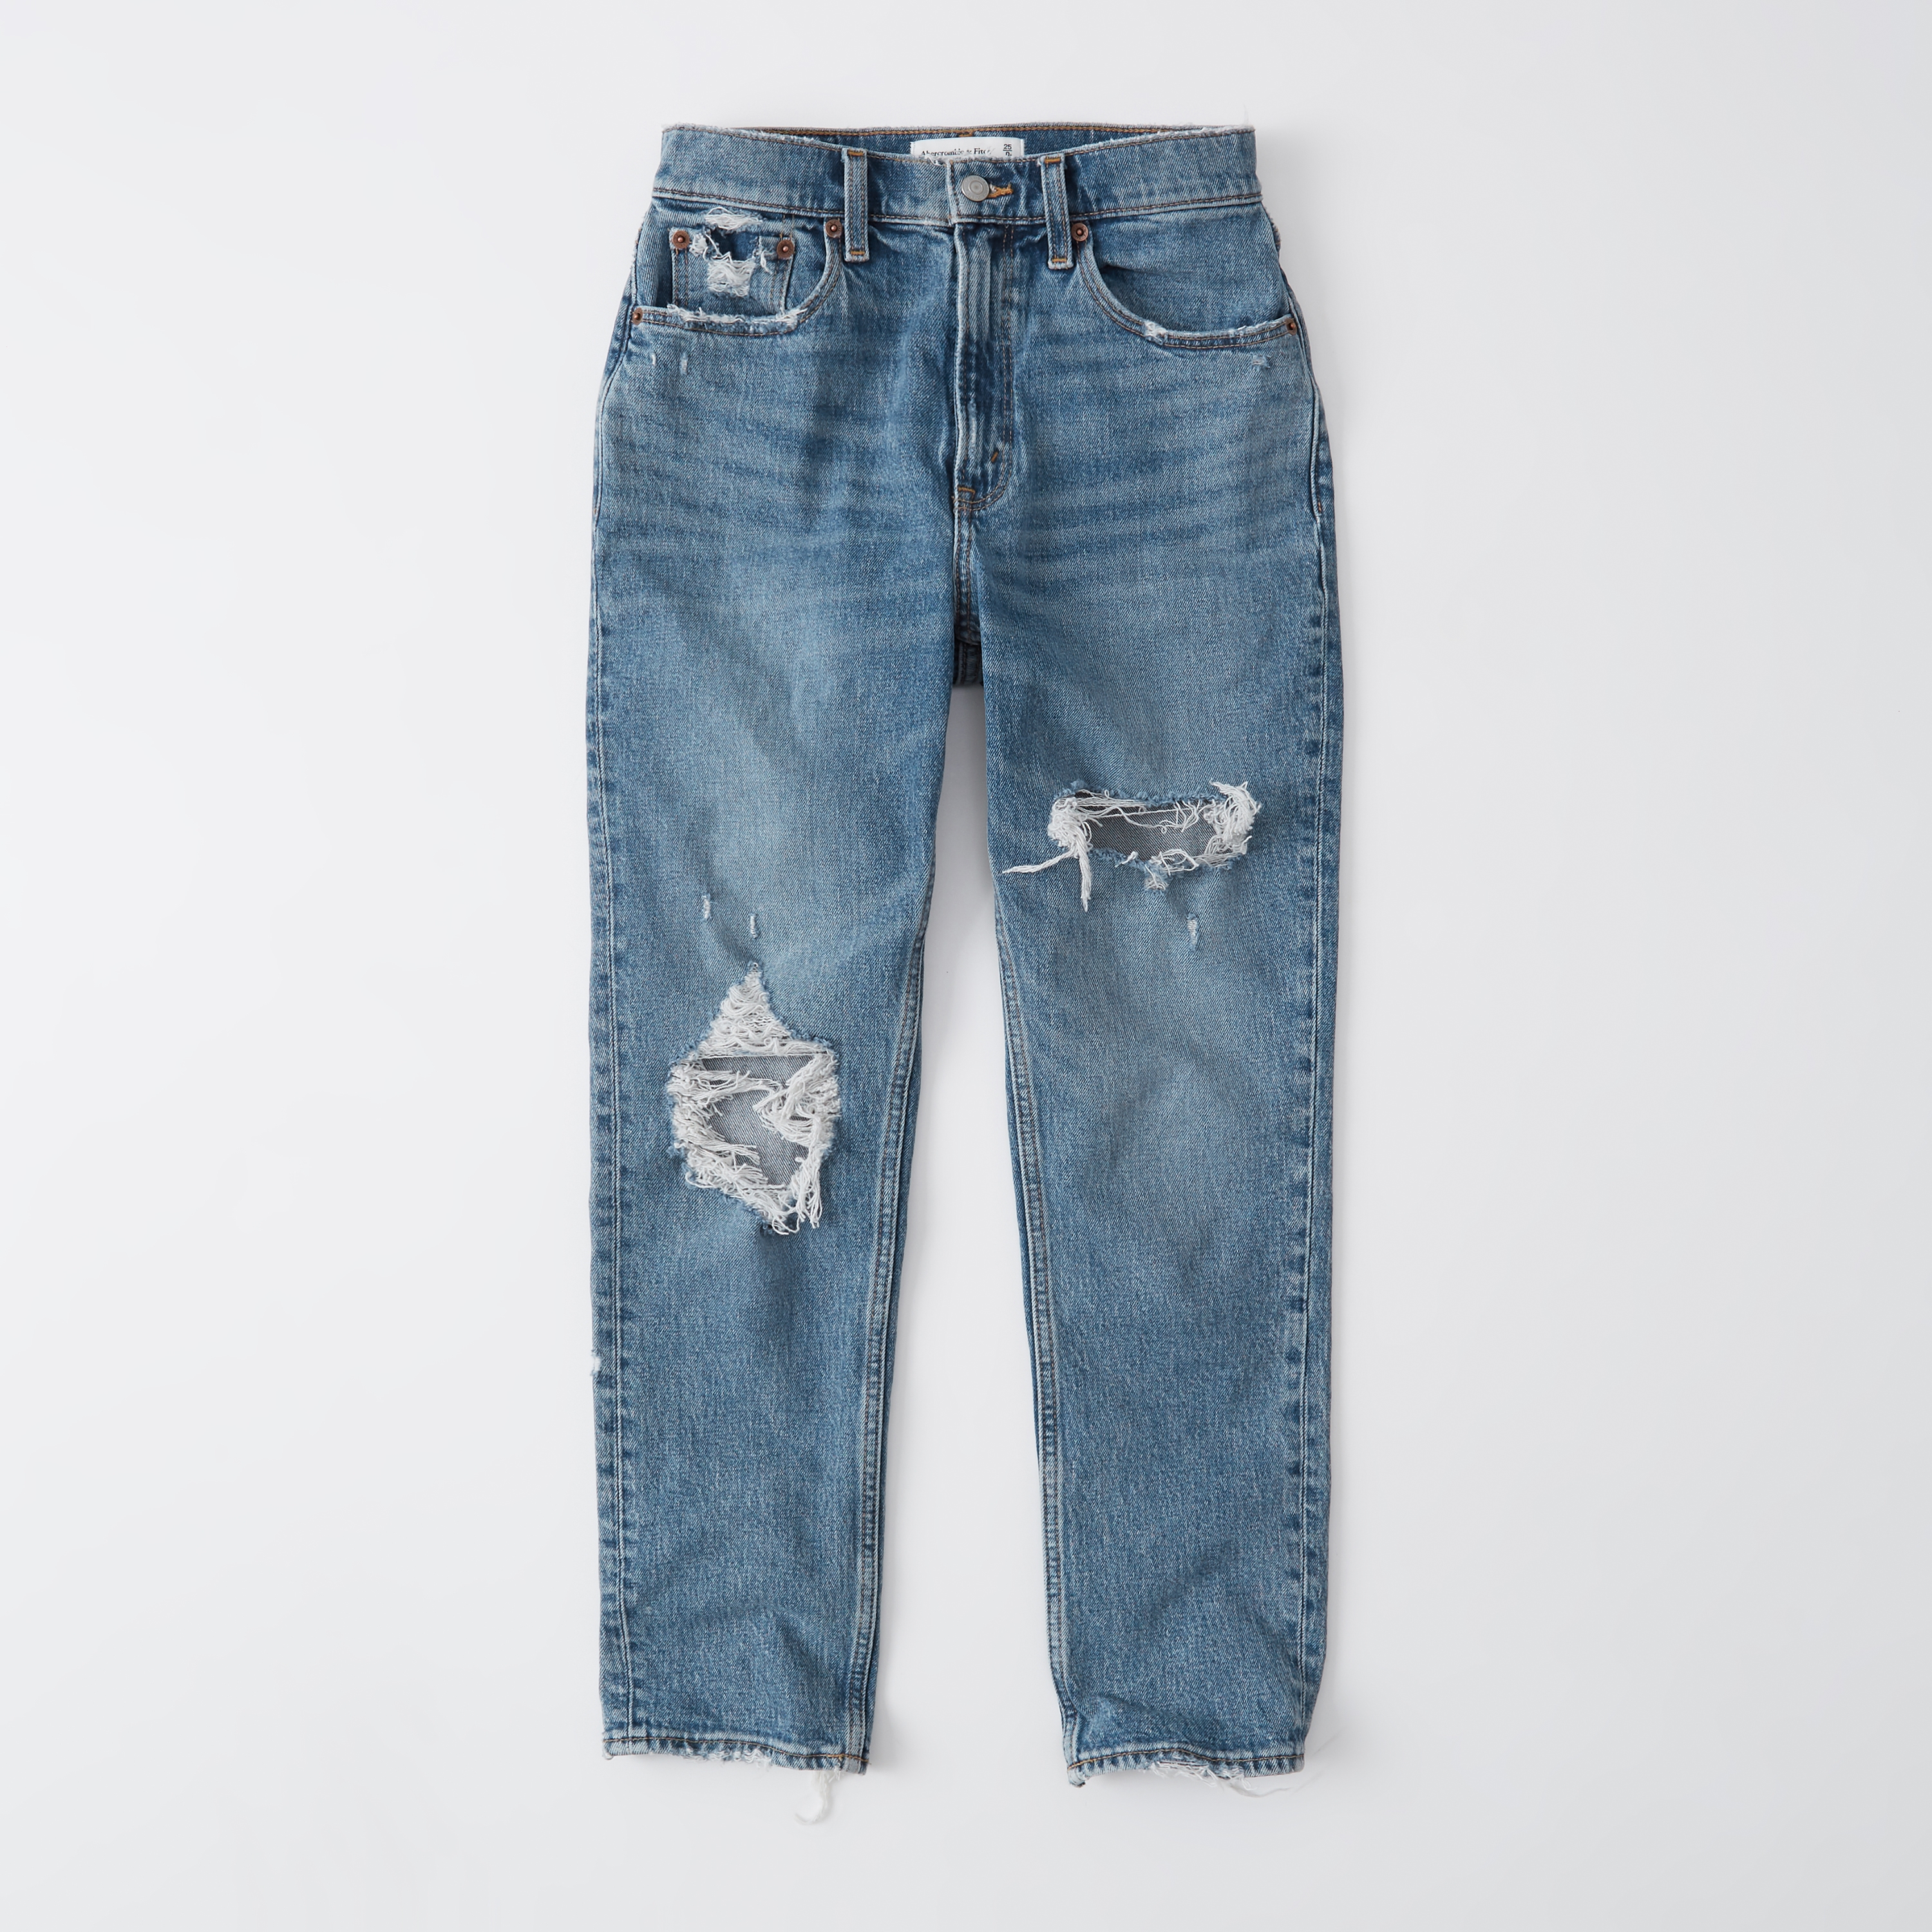 abercrombie and fitch jeans price